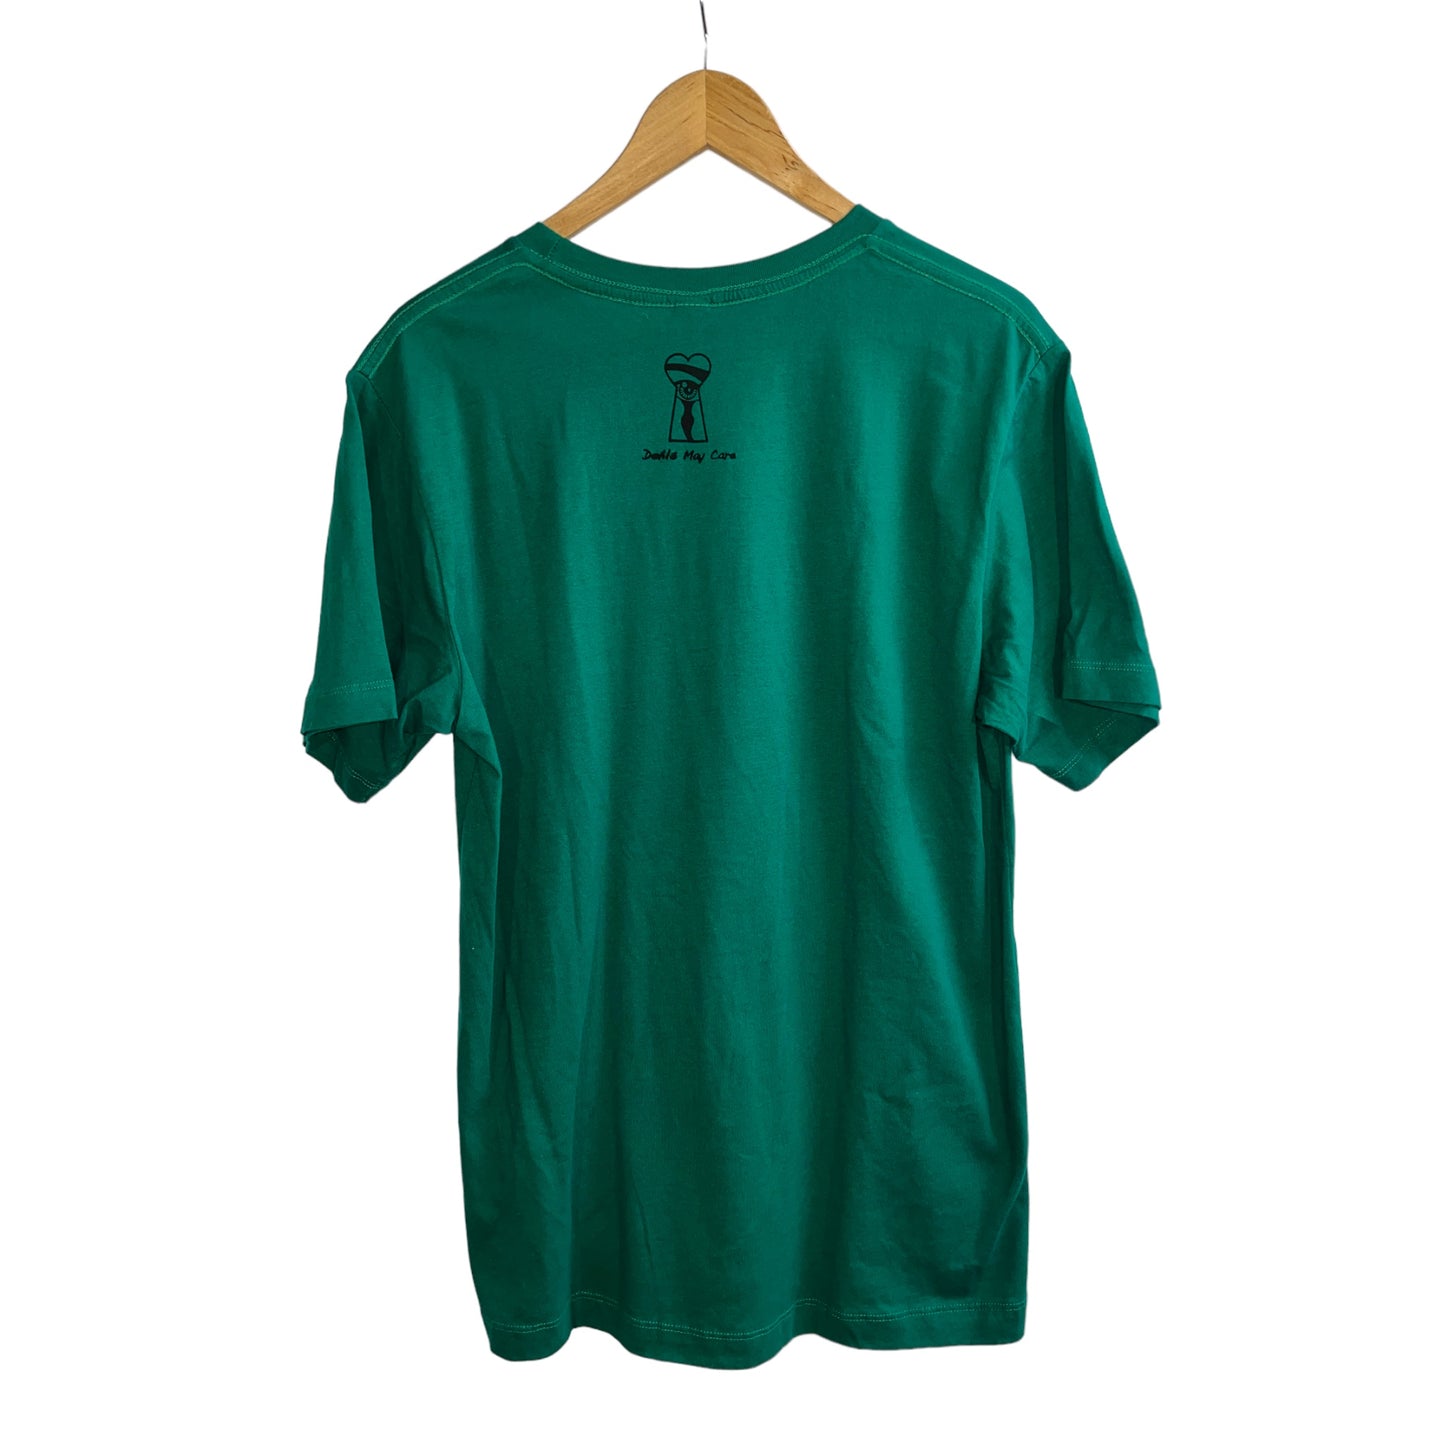 Destination Unkown - Green Crew Neck T-Shirt - By Devils May Care